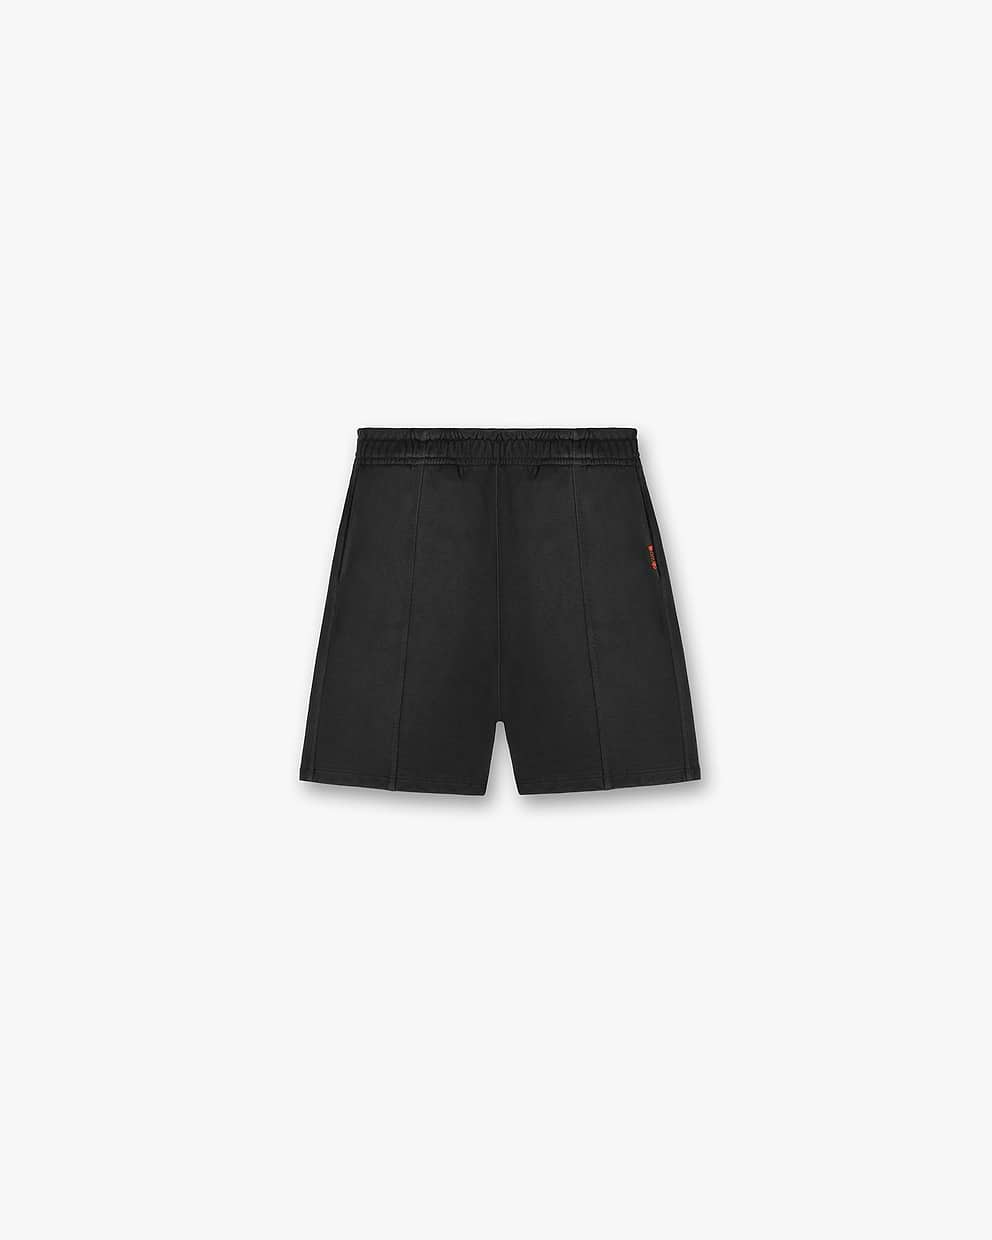 Represent X Feature Sweat Shorts - Stained Black